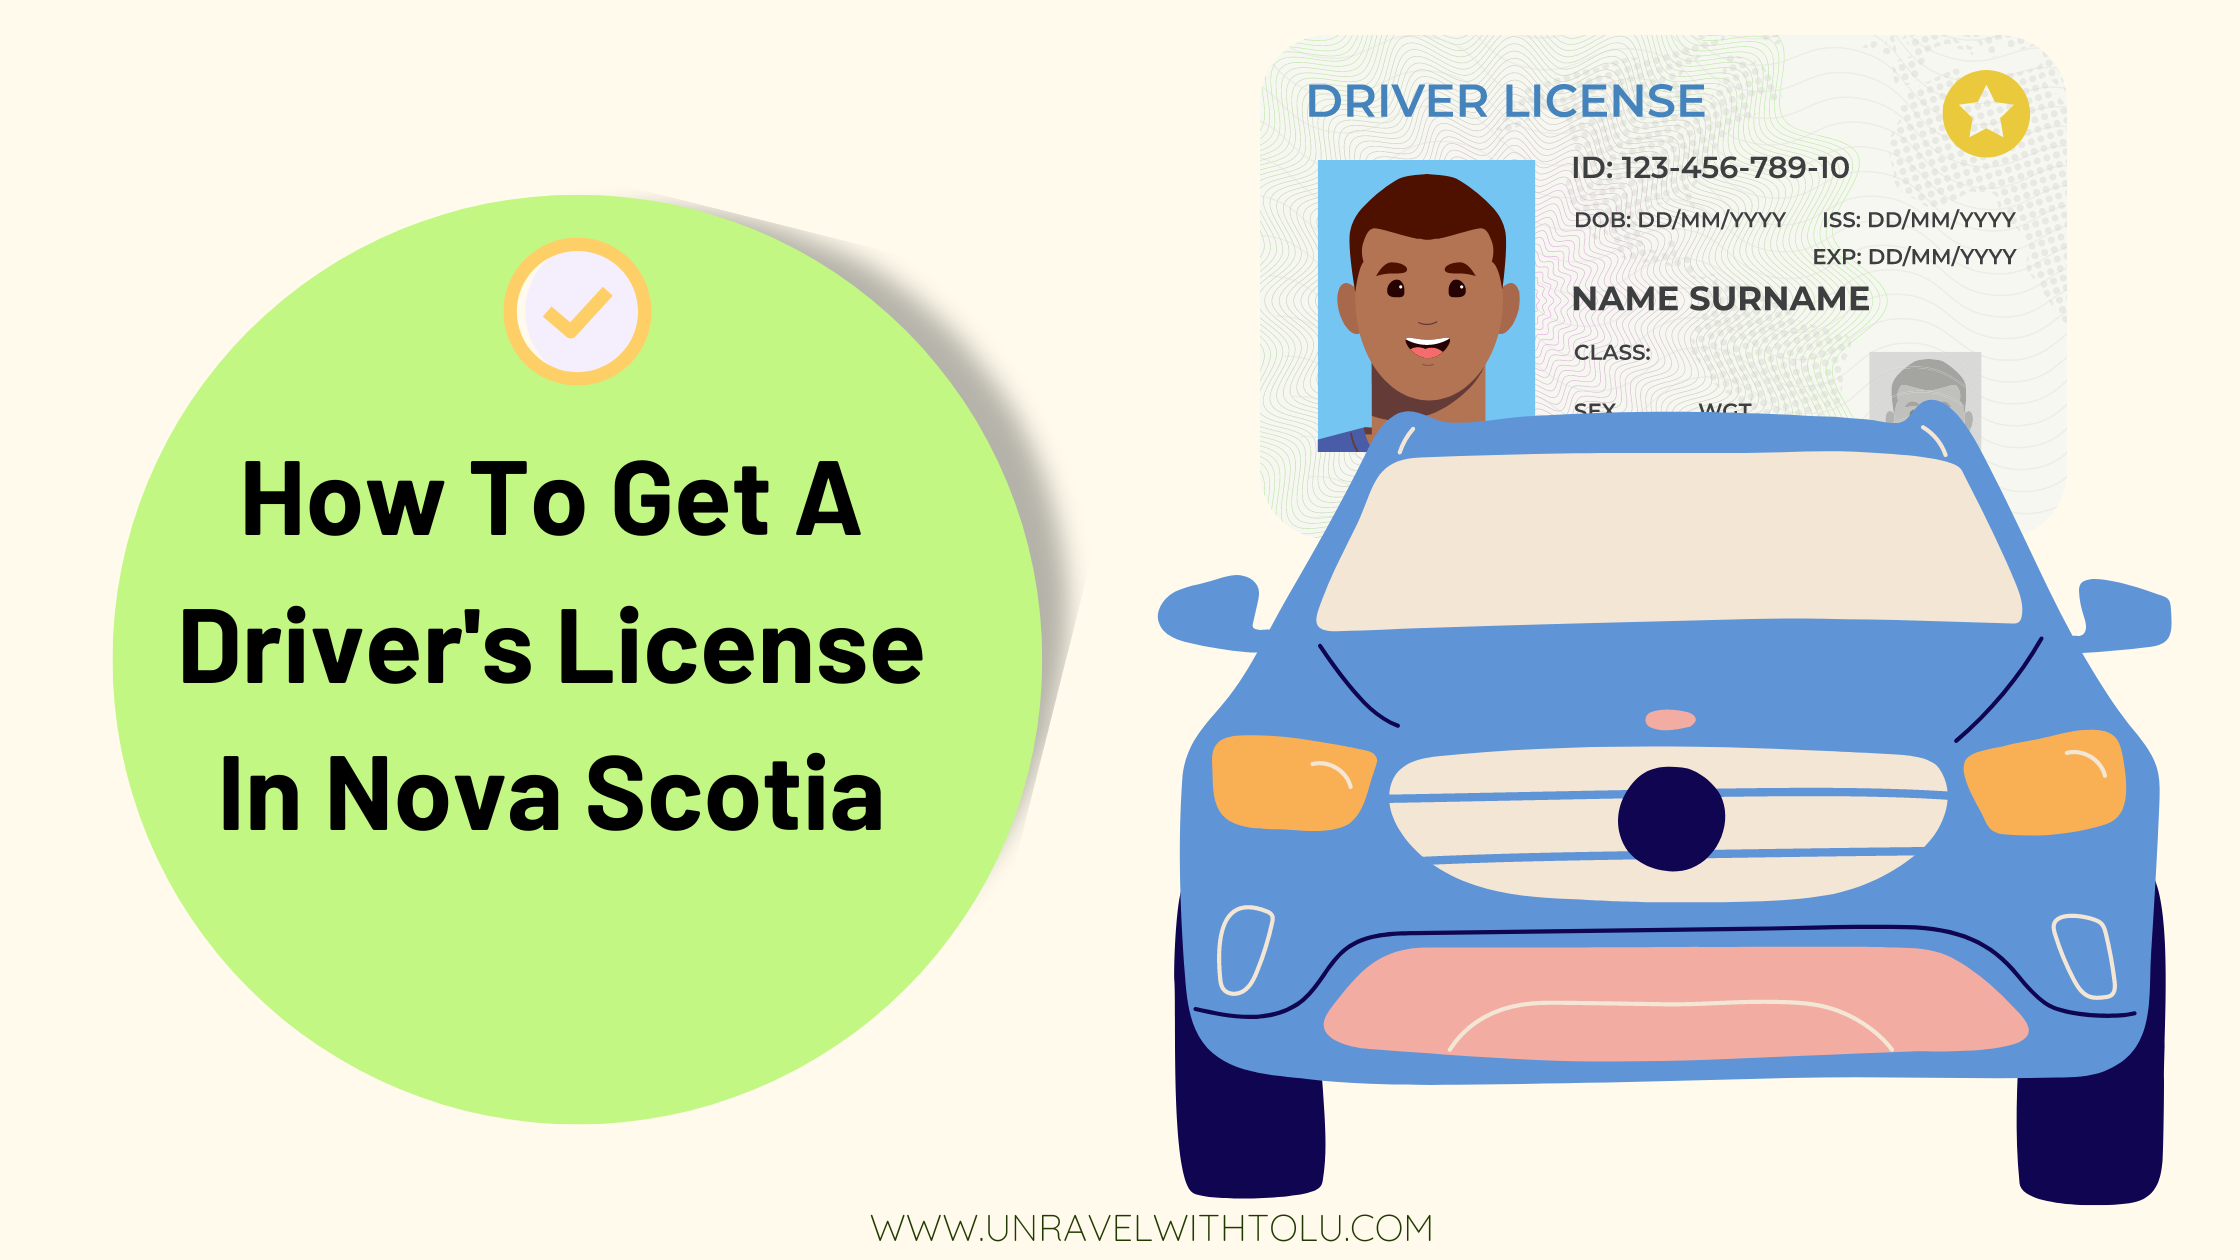 How To Get A Driver's License In Nova Scotia